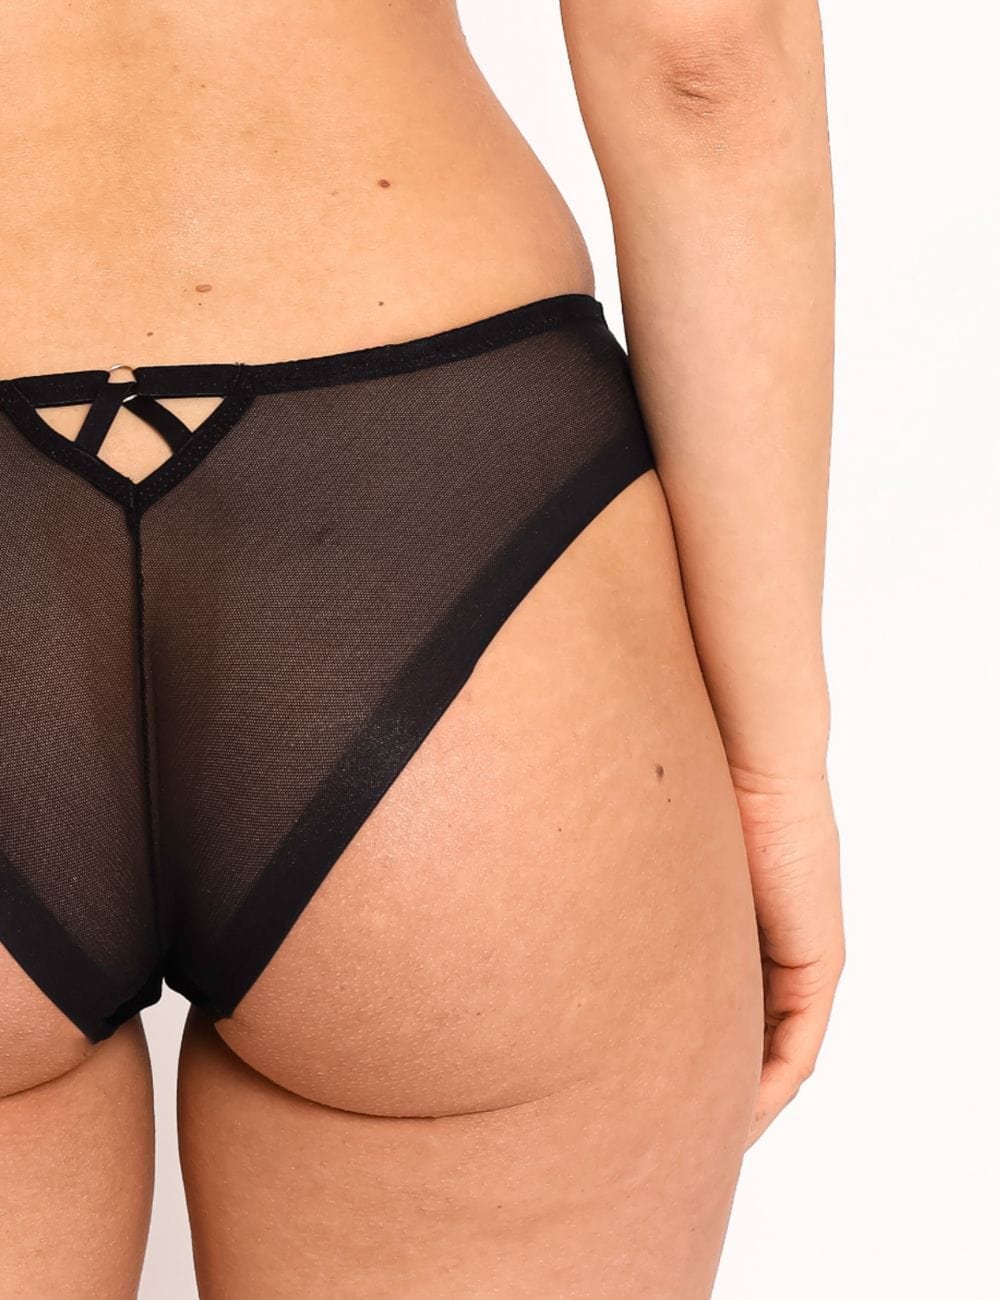 Samanta Lingerie: How to Find the Perfect Shape For Your Bust